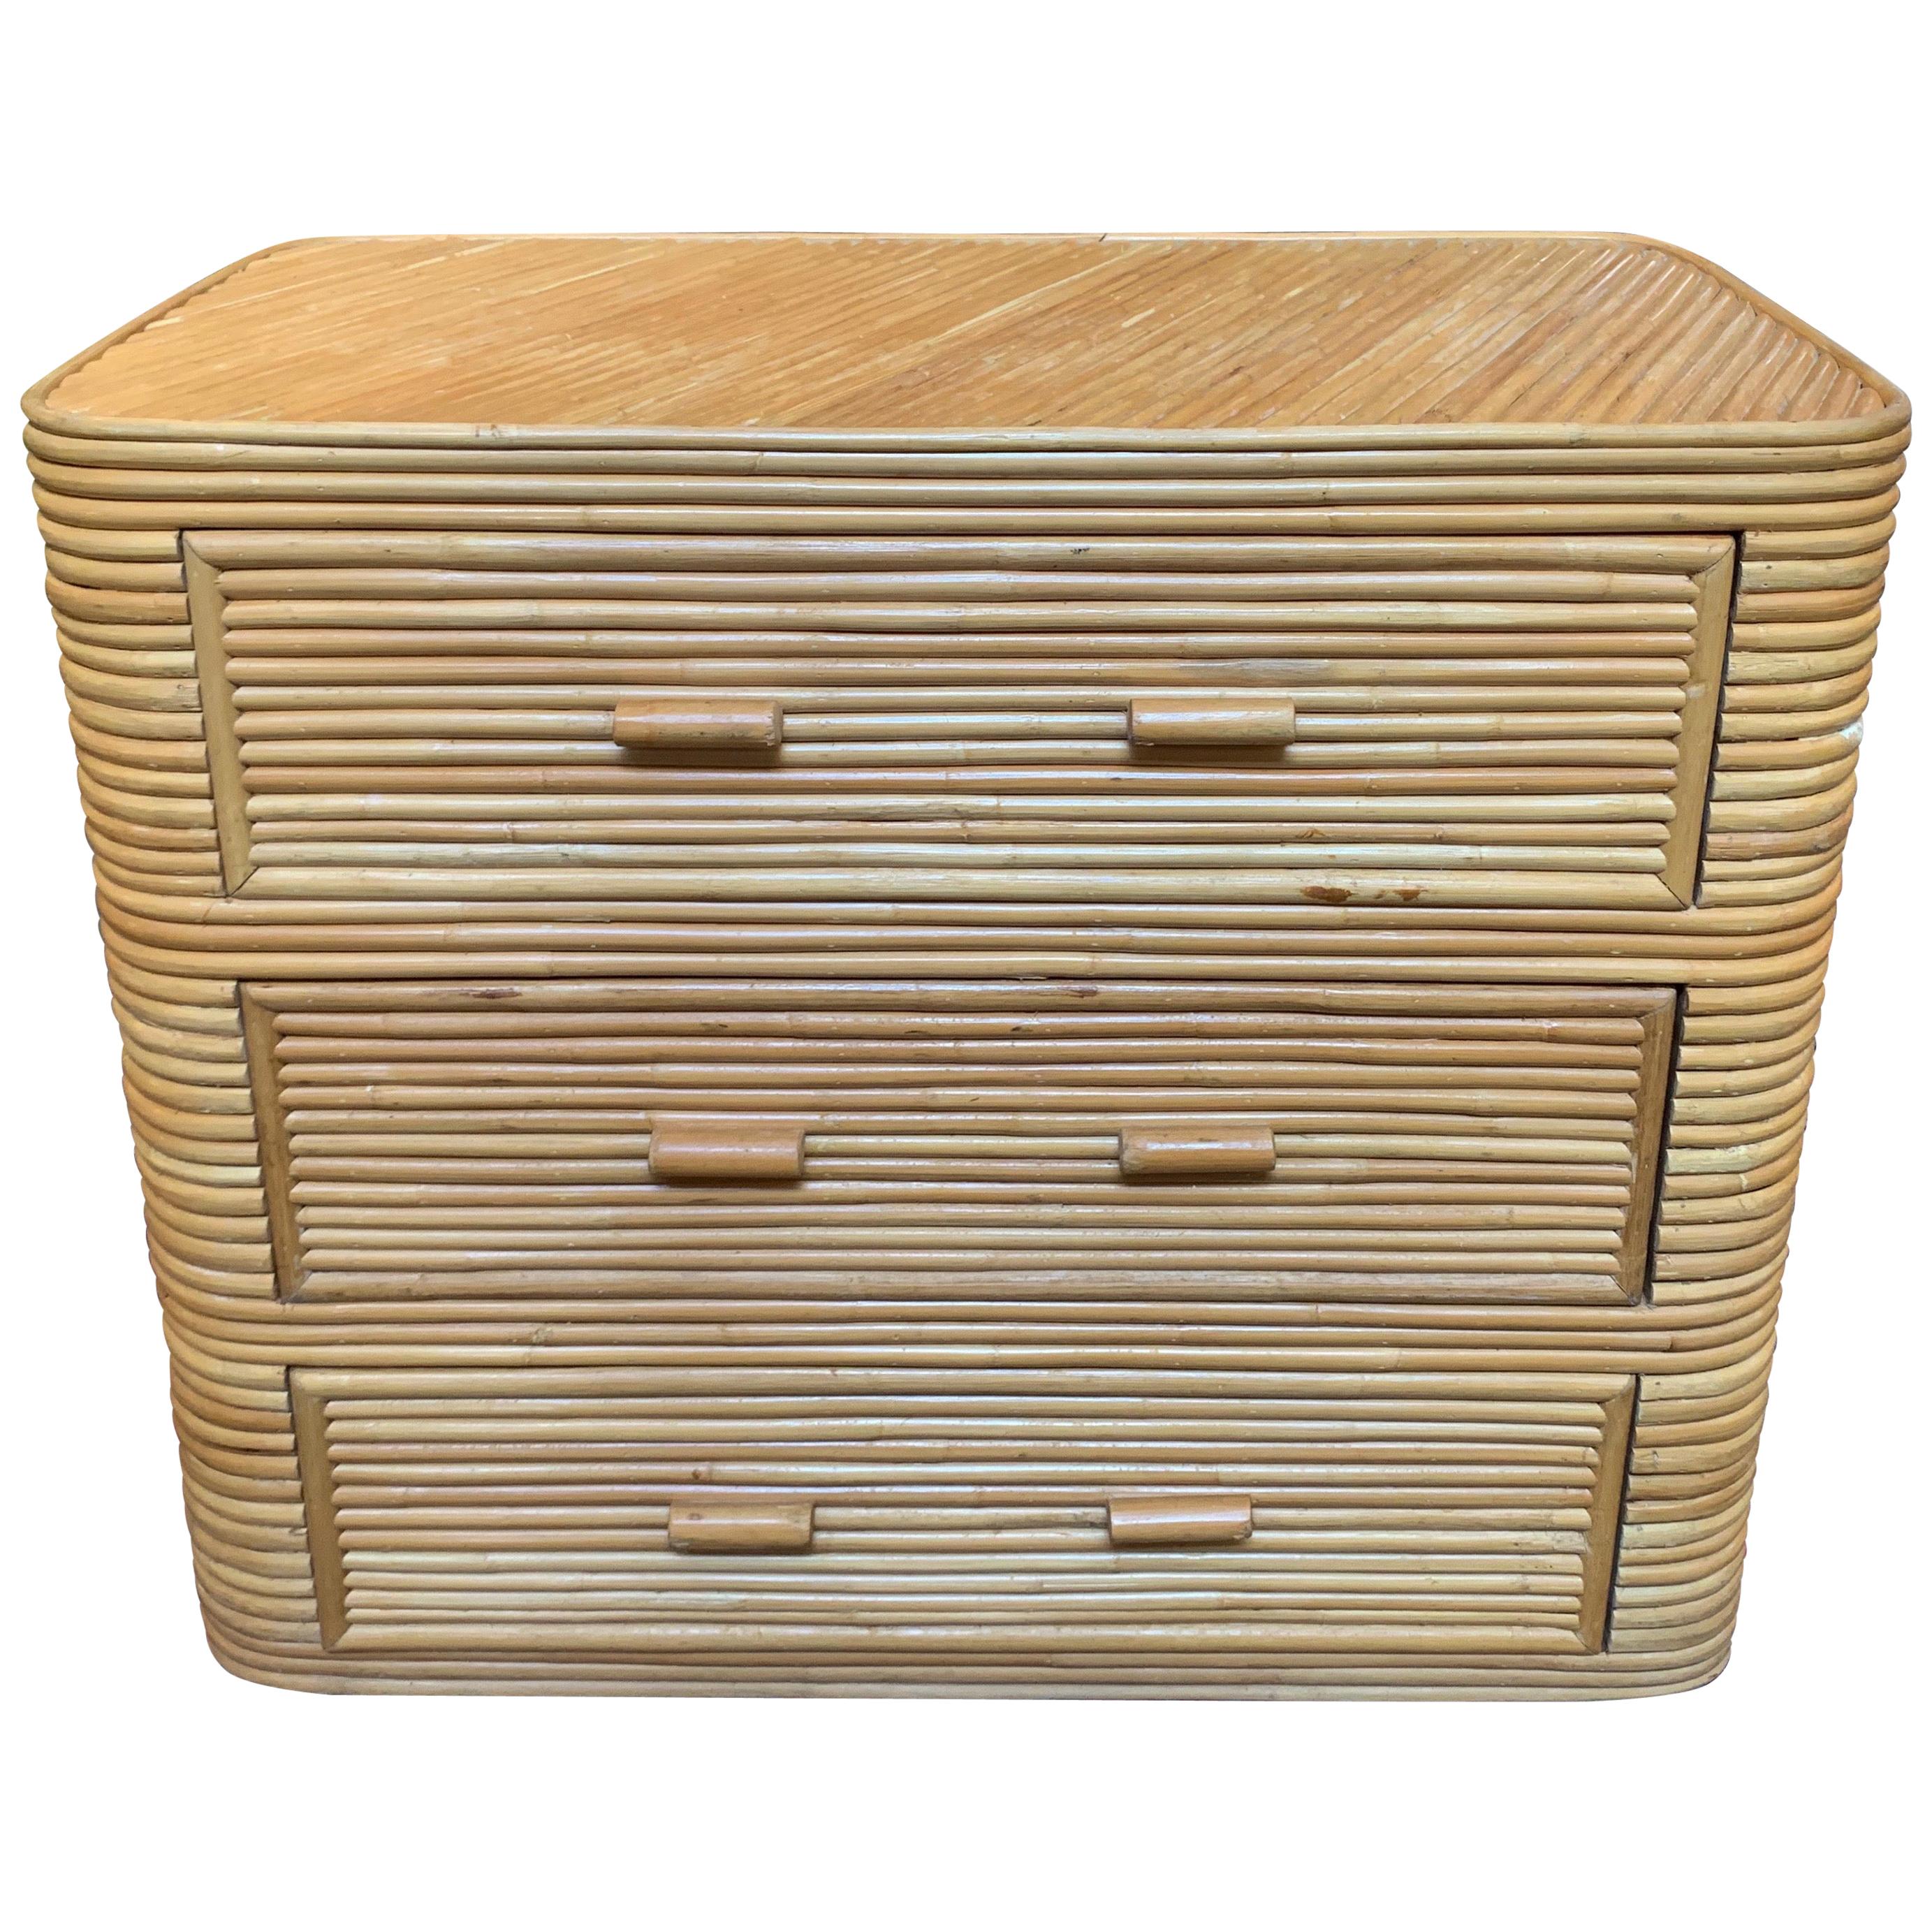 Vintage Italian Bamboo Chest For Sale